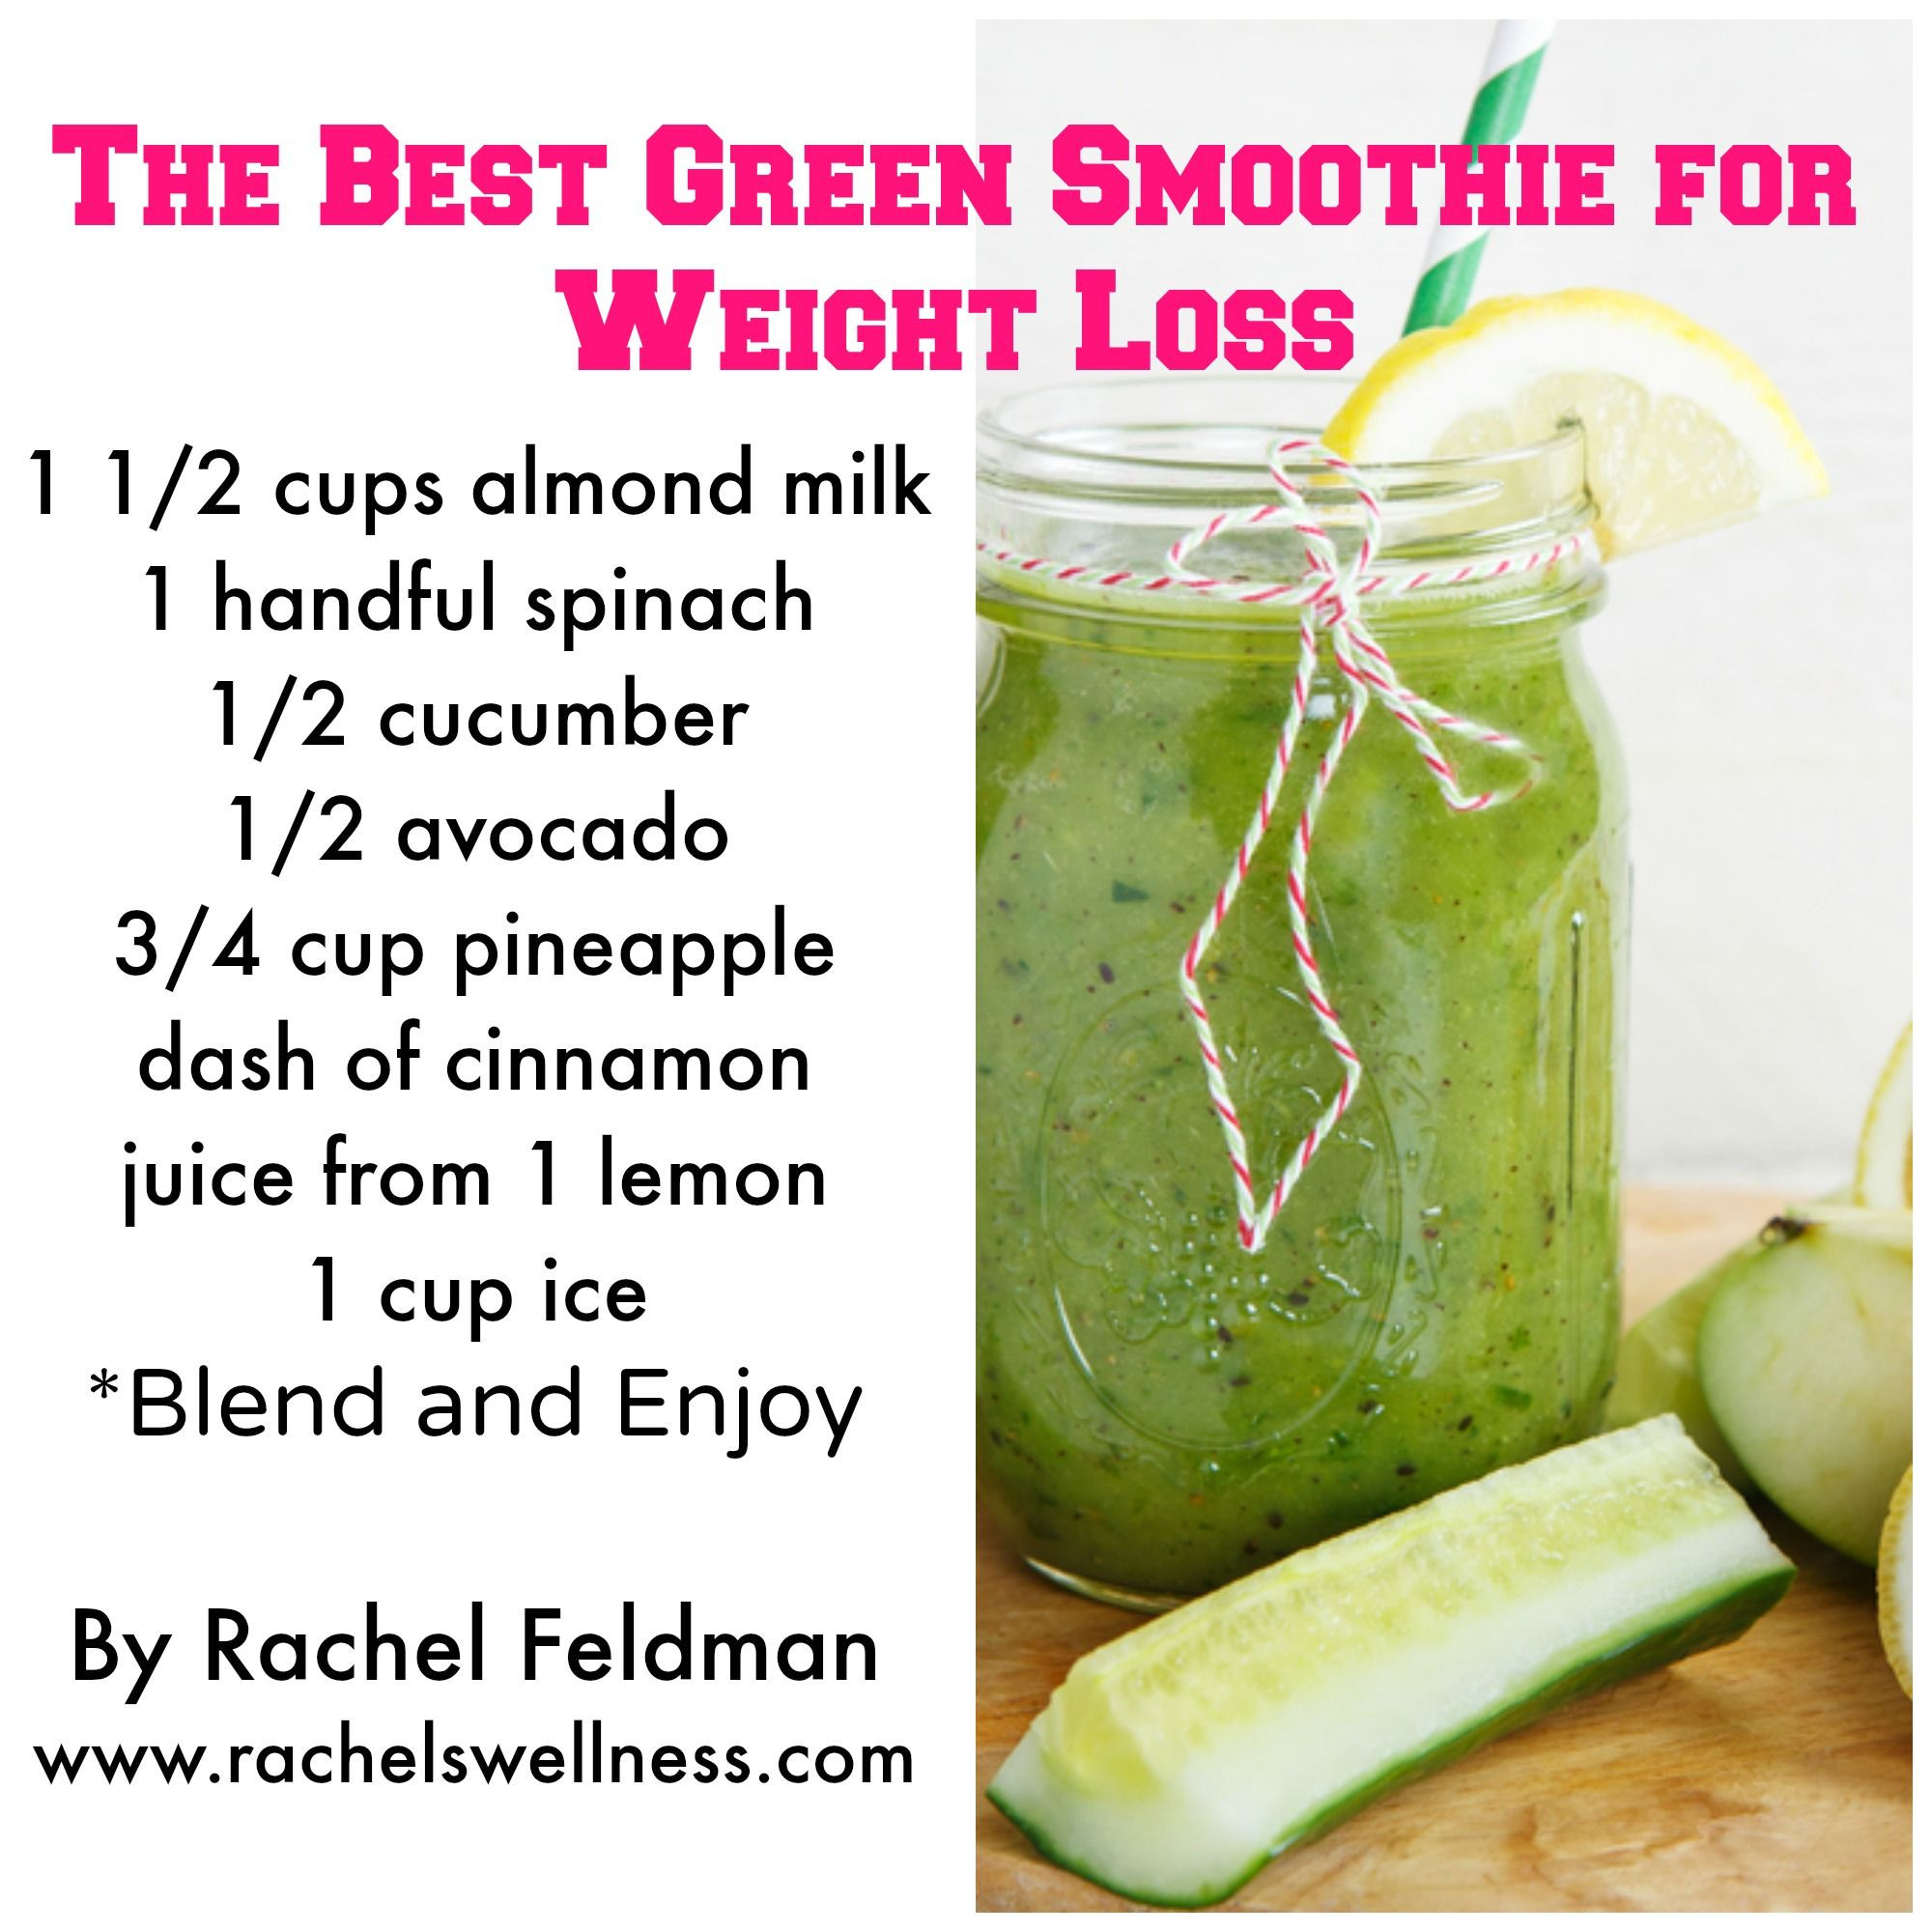 Smoothie Diet Recipes For Weight Loss Plan
 7 Healthy Green Smoothie Recipes For Weight Loss